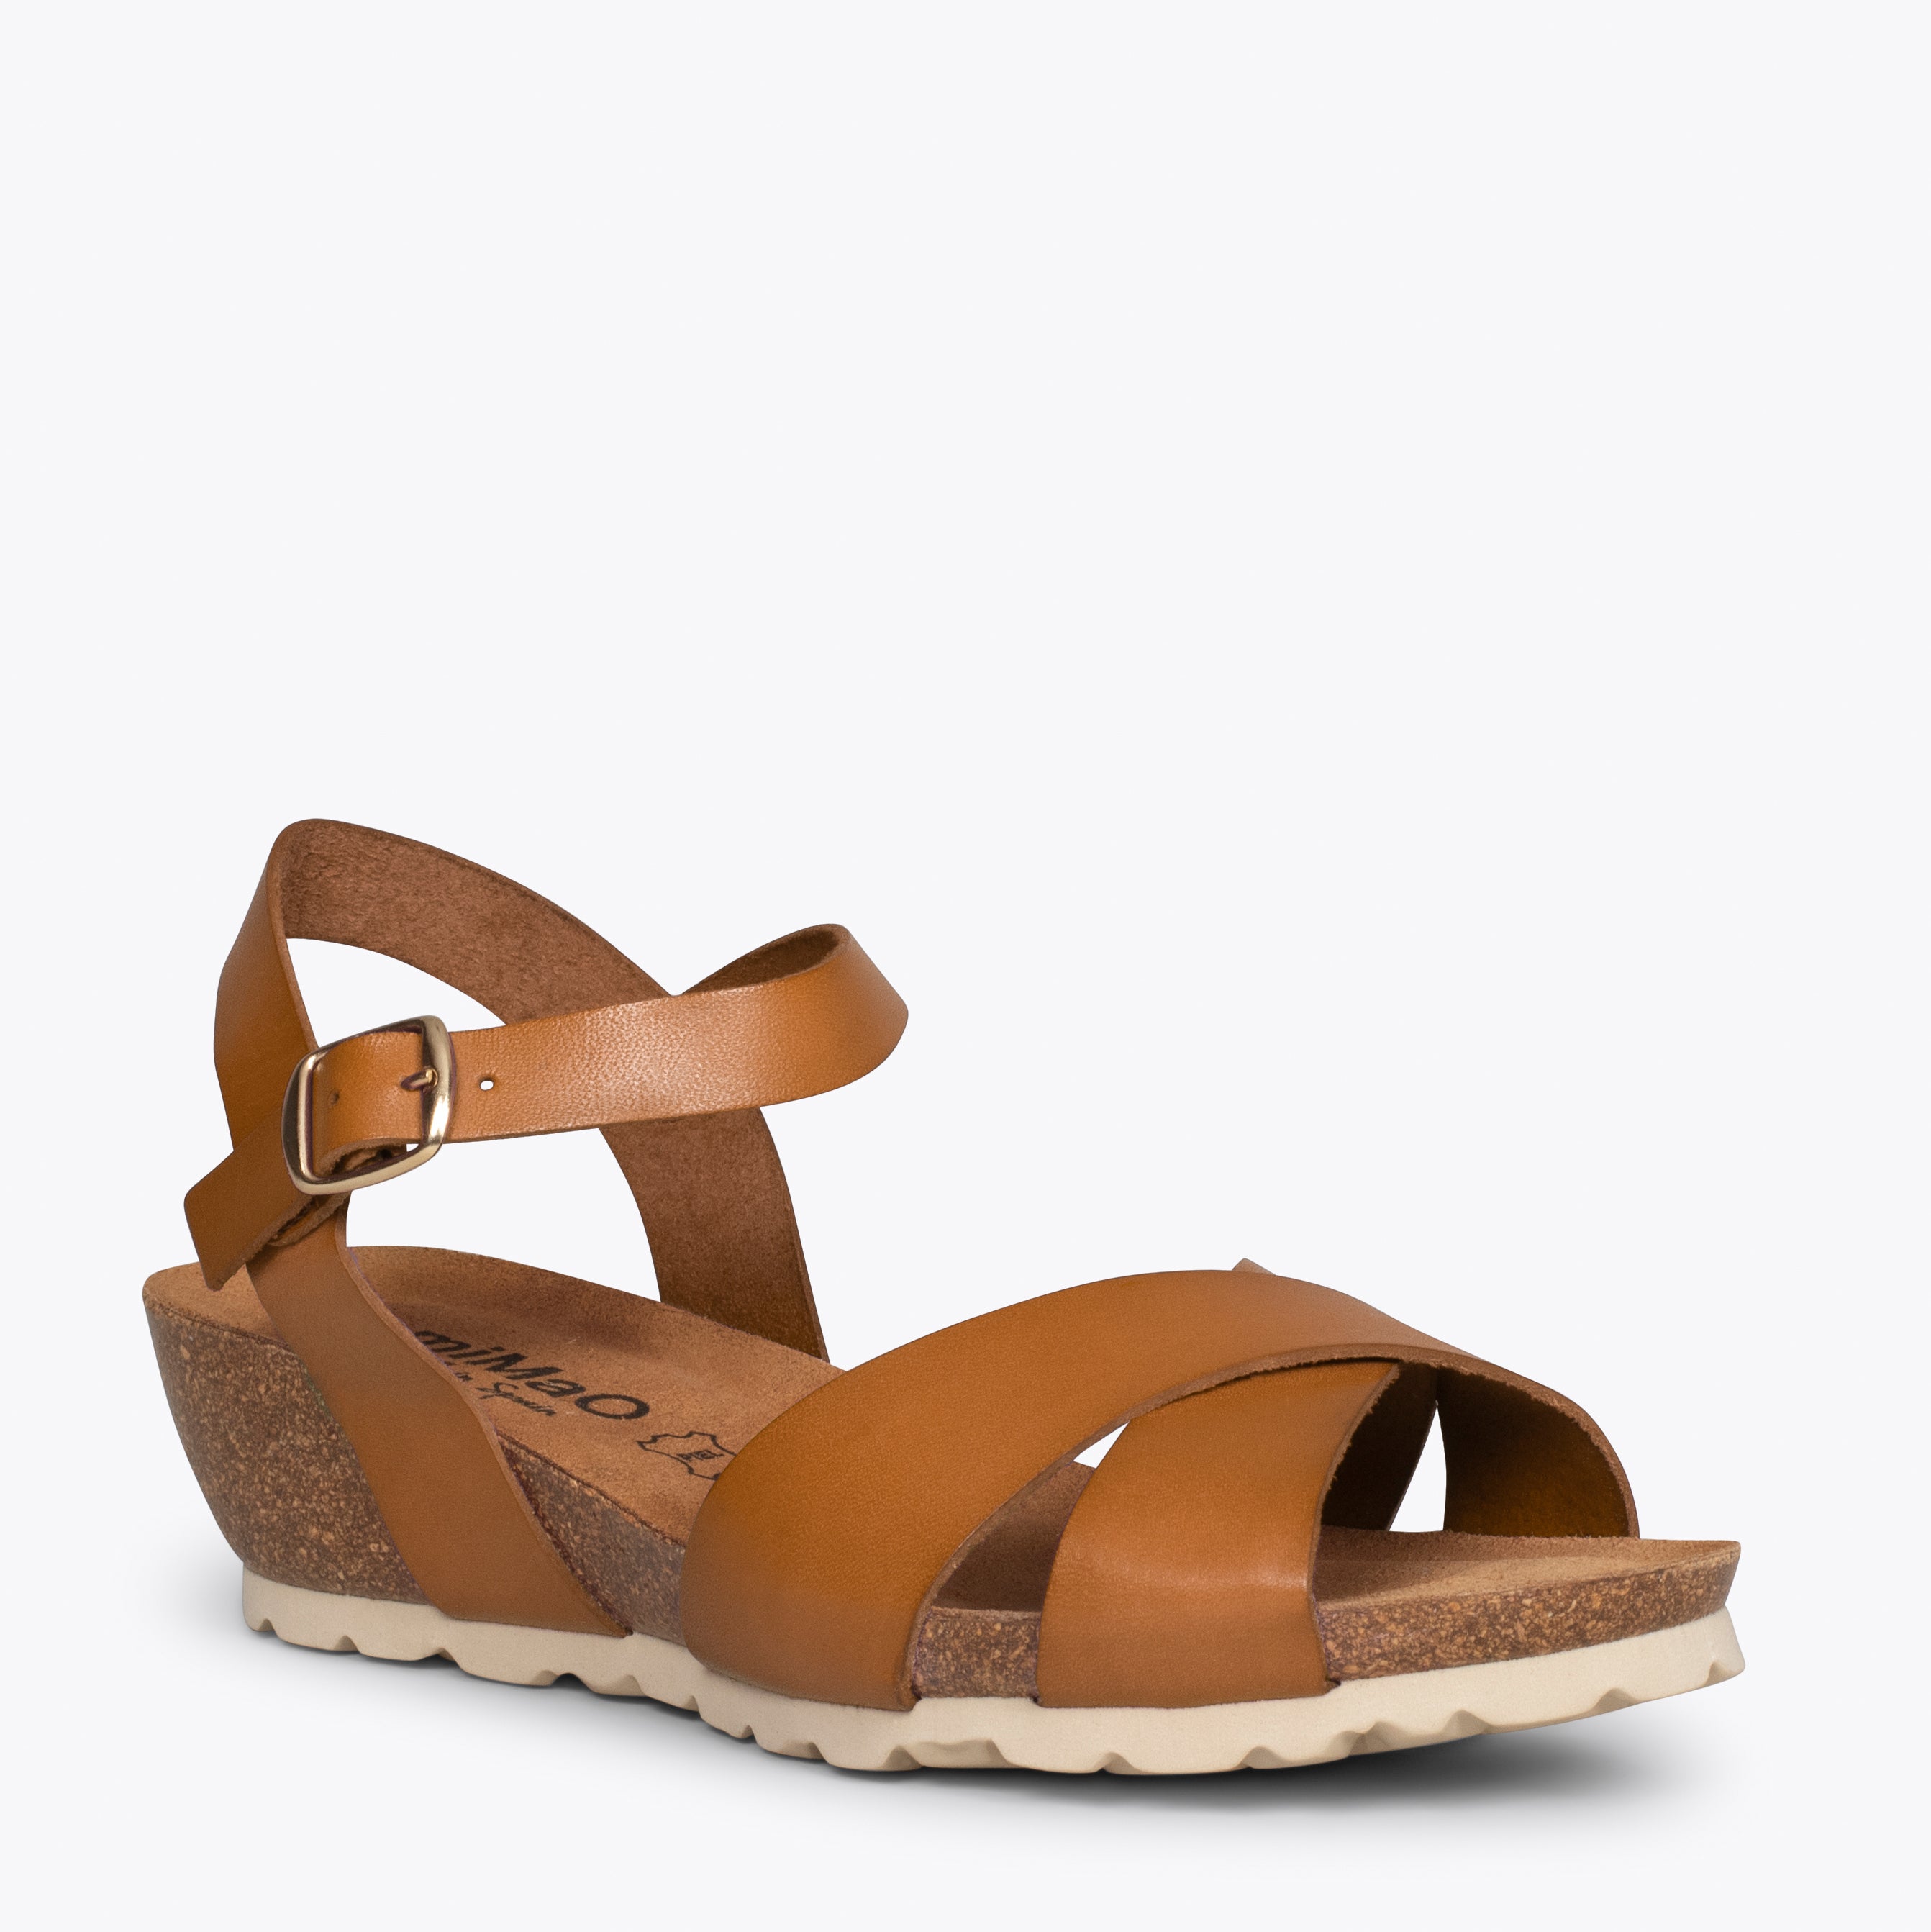 LOTO – CAMEL wedge sandals with BIO sole